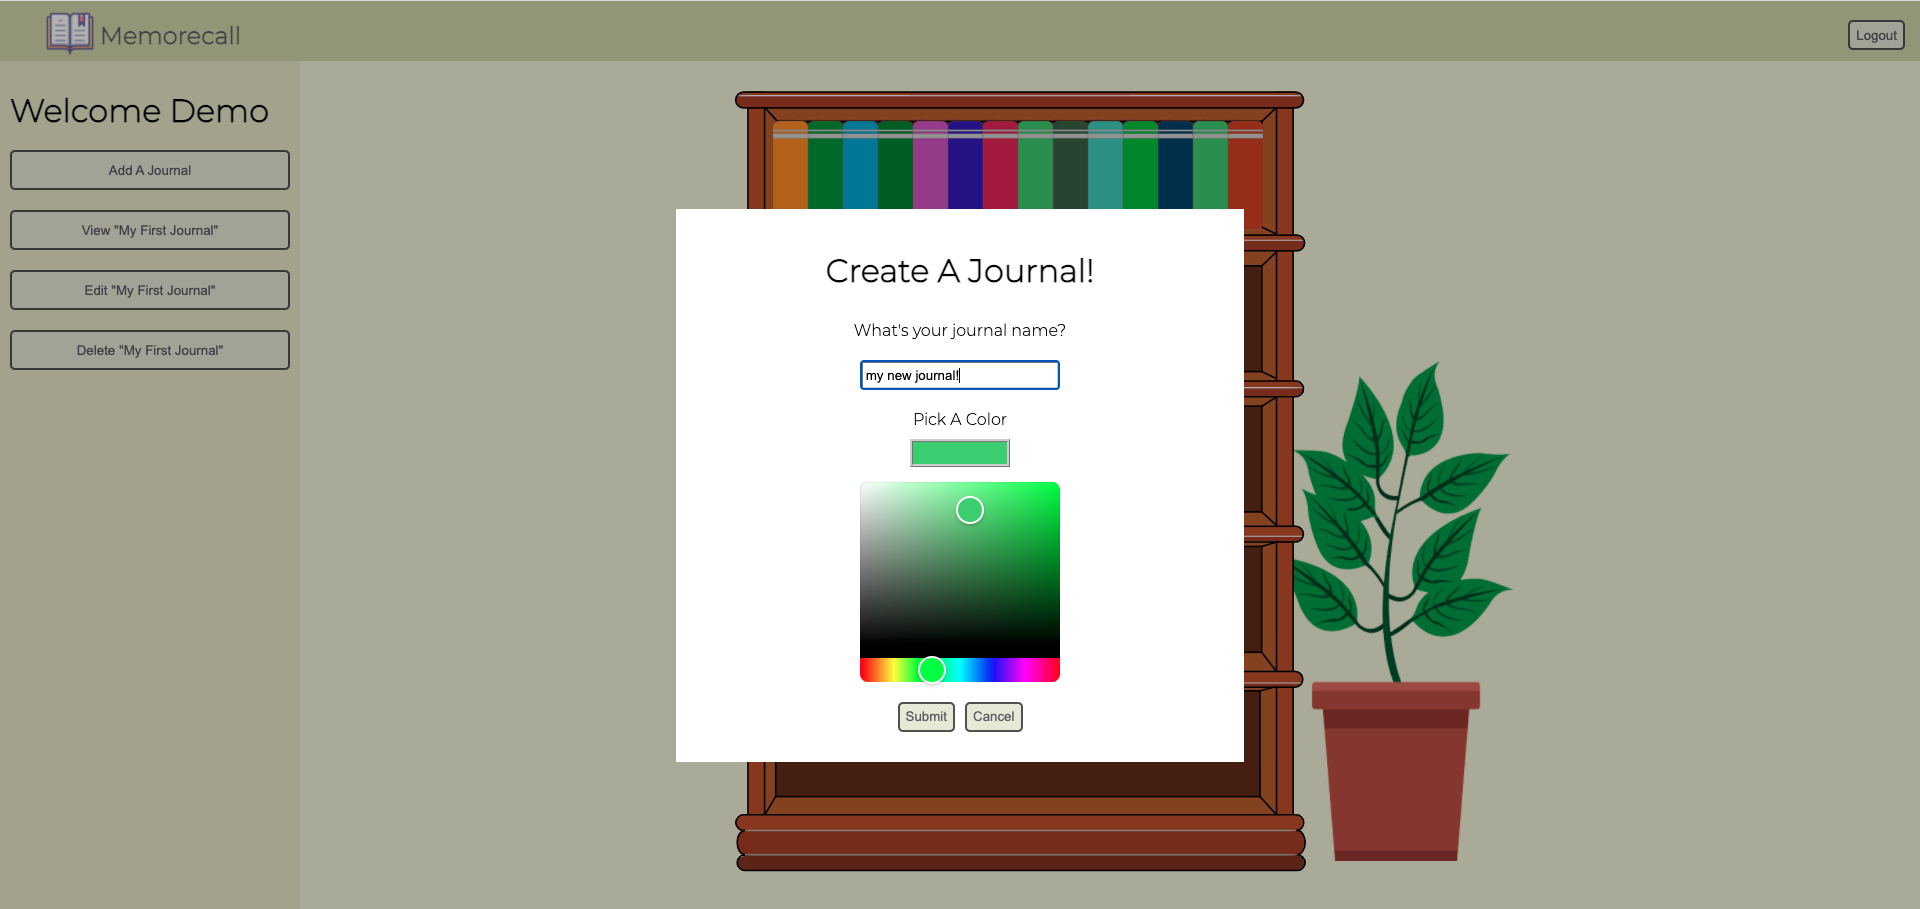 Creating a journal